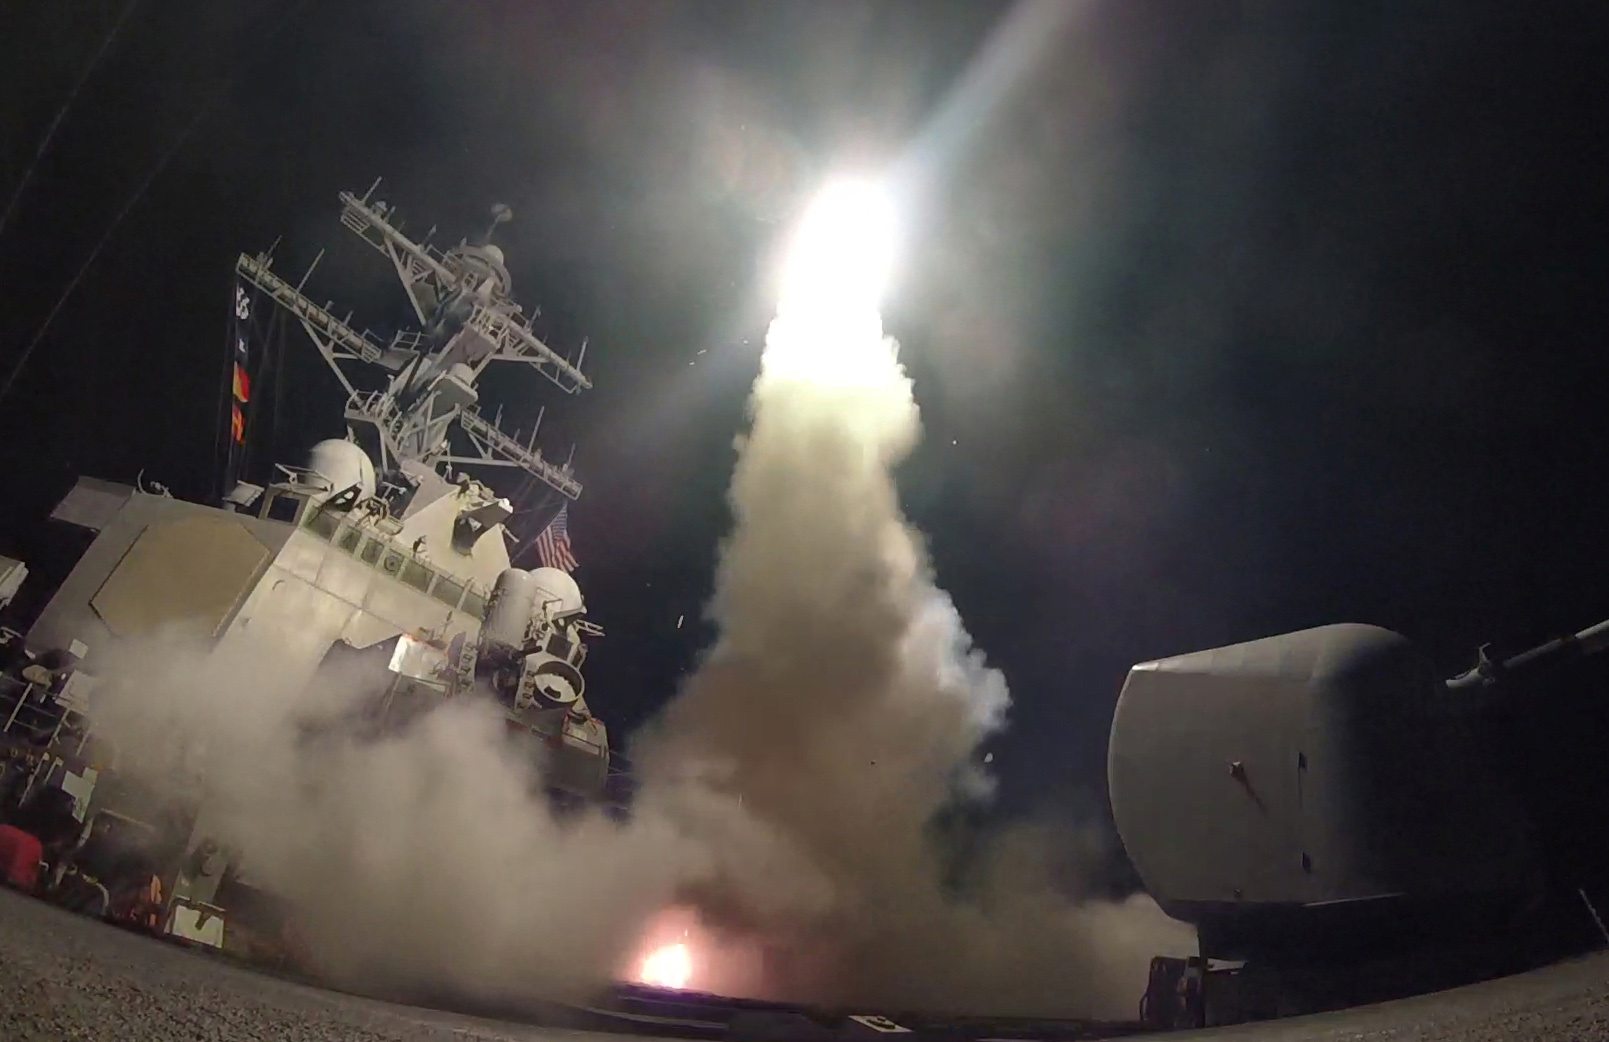 U.S. Navy guided-missile destroyer USS Porter (DDG 78) conducts strike operations while in the Mediterranean Sea which U.S. Defense Department said was a part of cruise missile strike against Syria on April 7, 2017 / via REUTERS. Ford Williams/Courtesy U.S. Navy/Handout